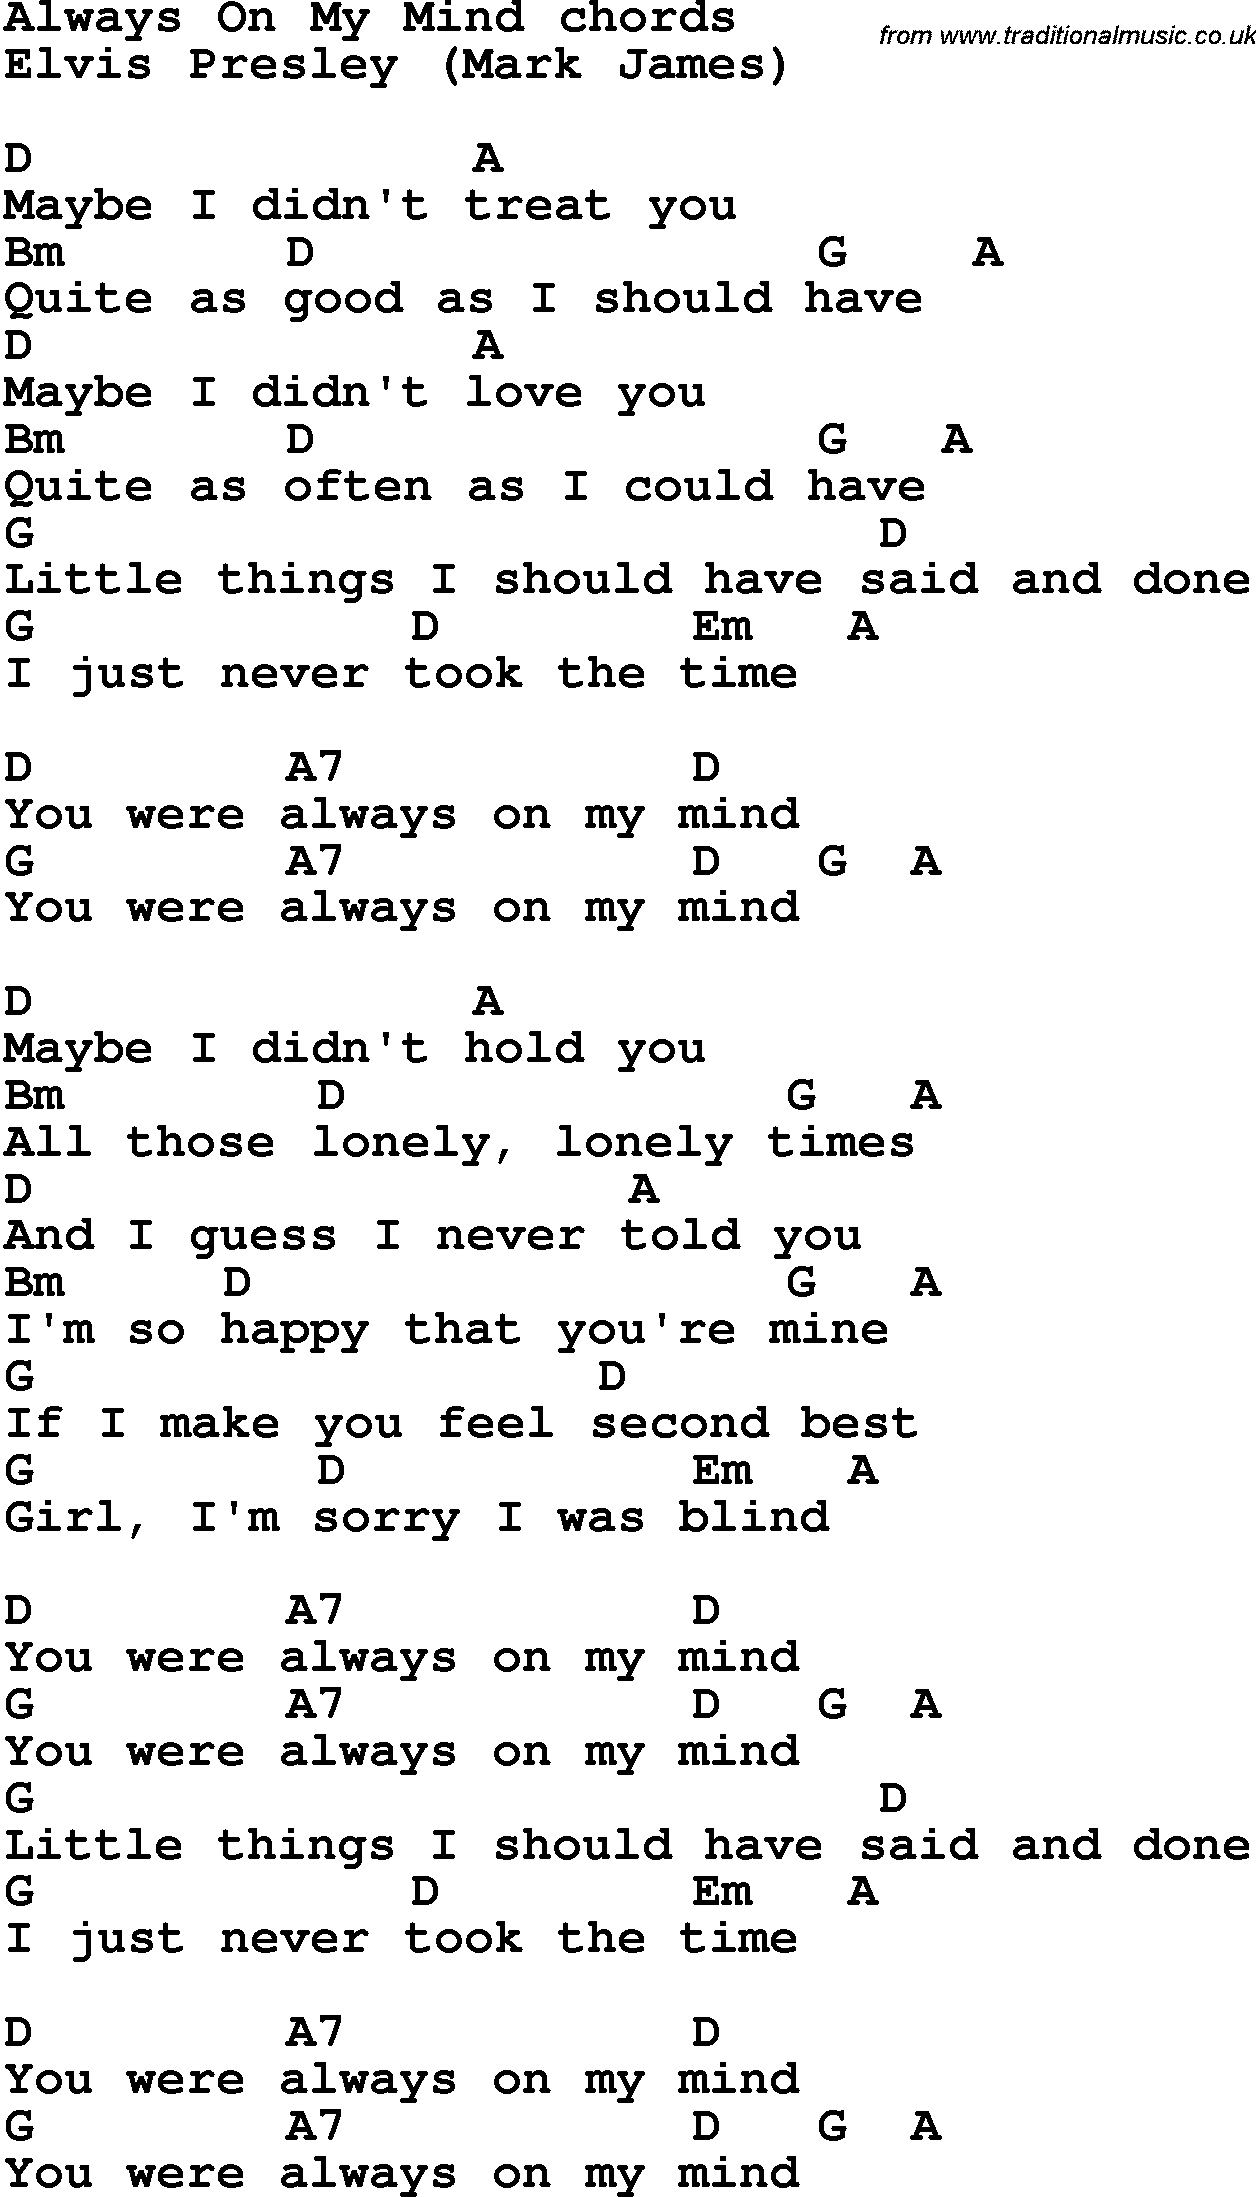 Song Lyrics with guitar chords for Always On My Mind